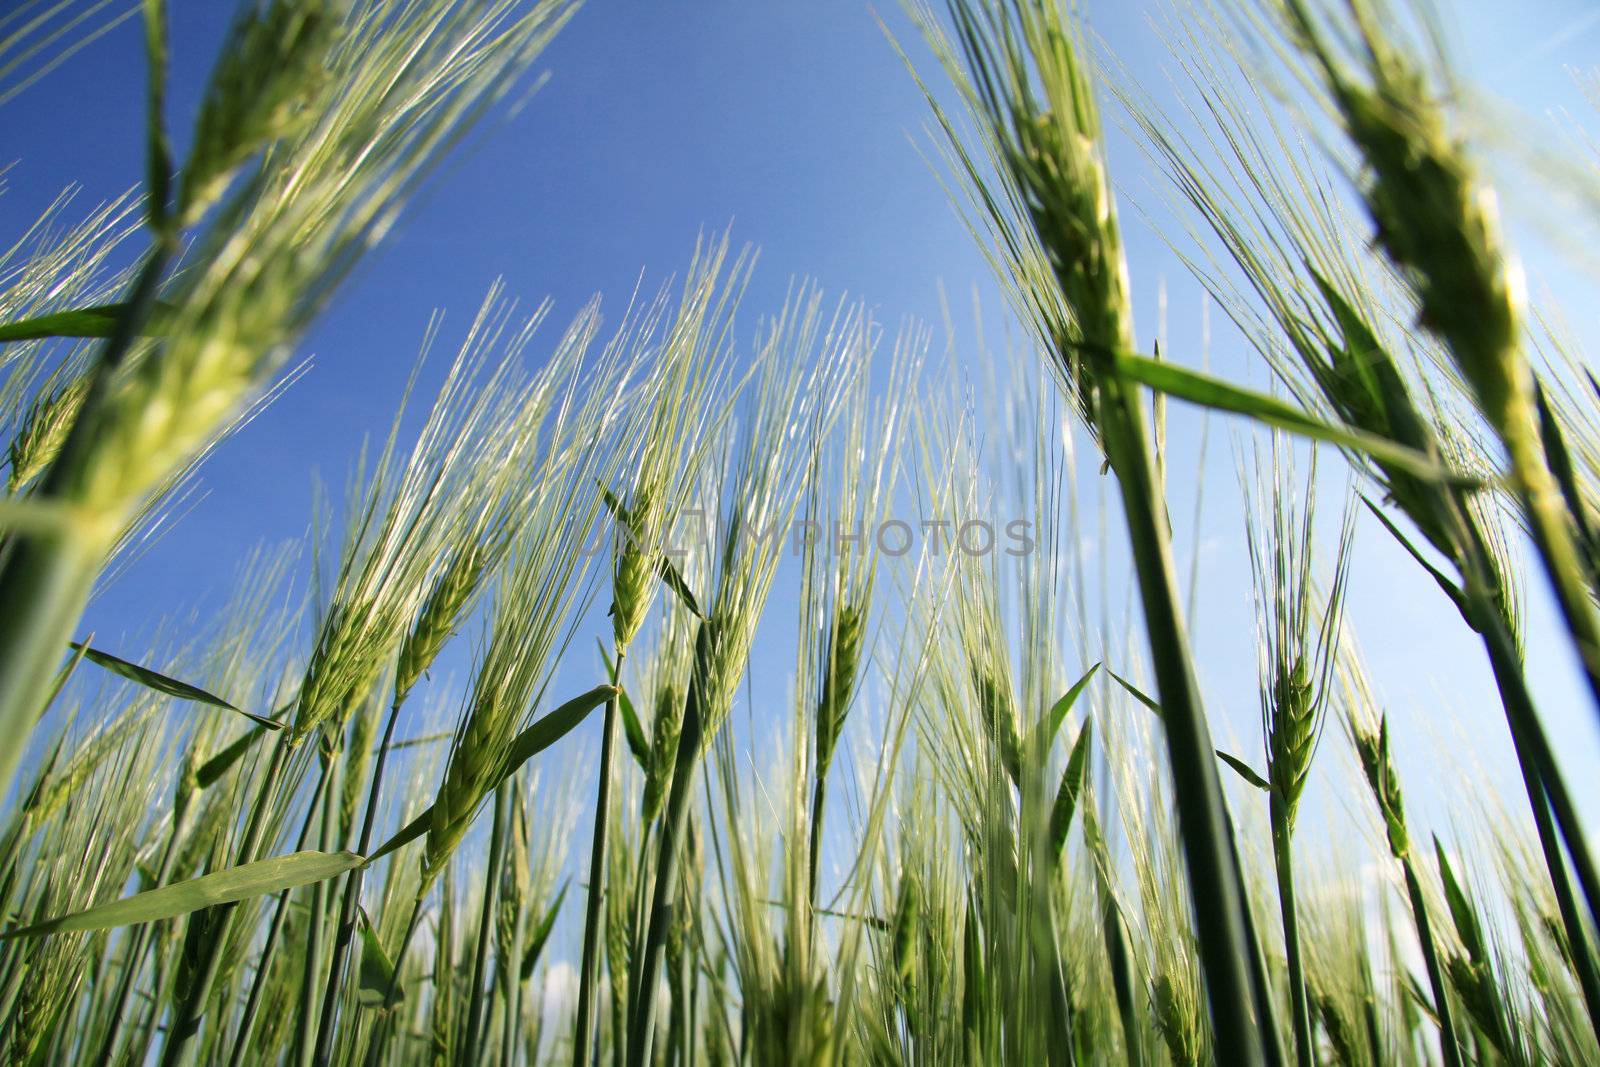 wheat field from frog perspective from below, photographed against a blue sky
